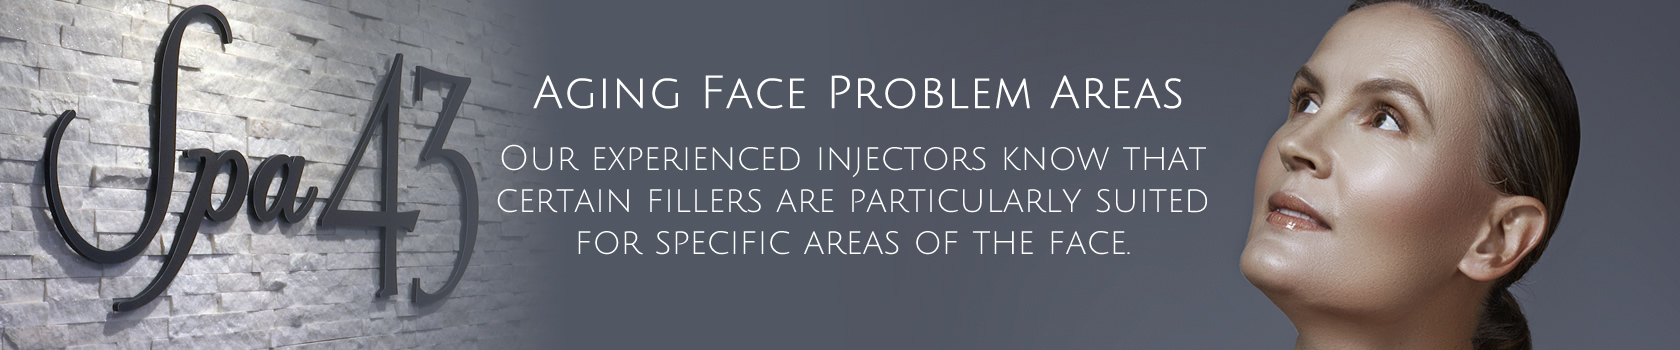 Facial Fillers and Botox by experienced injectors Clinton Township